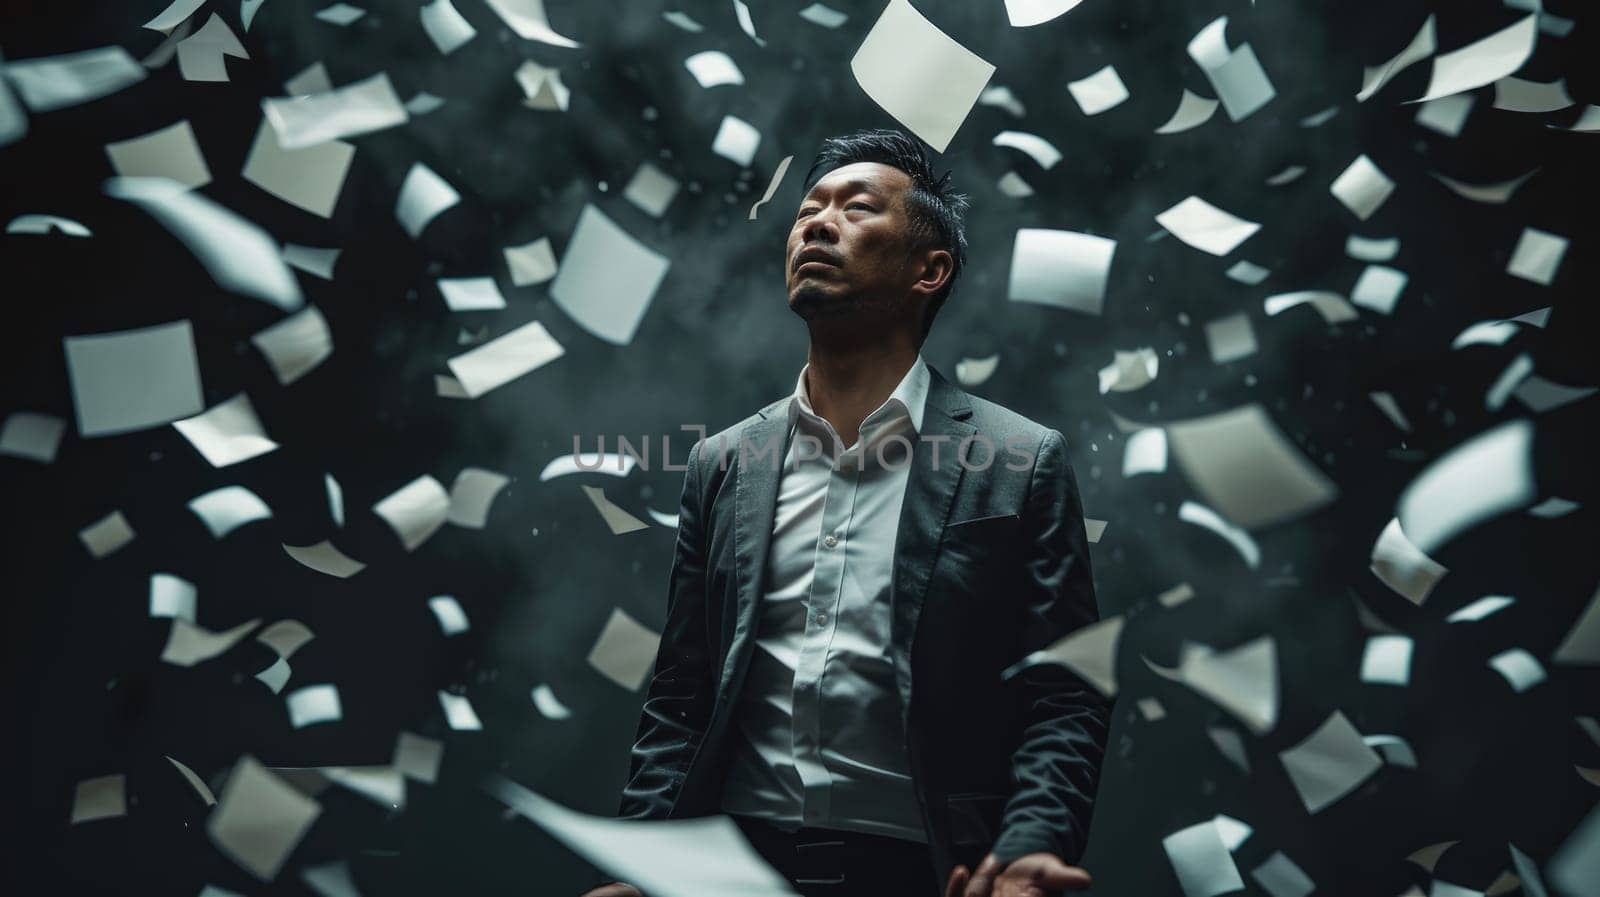 A man in a suit is standing in a room with paper flying everywhere. The scene is chaotic and disordered, with the man looking up at the papers as if they are falling from the sky